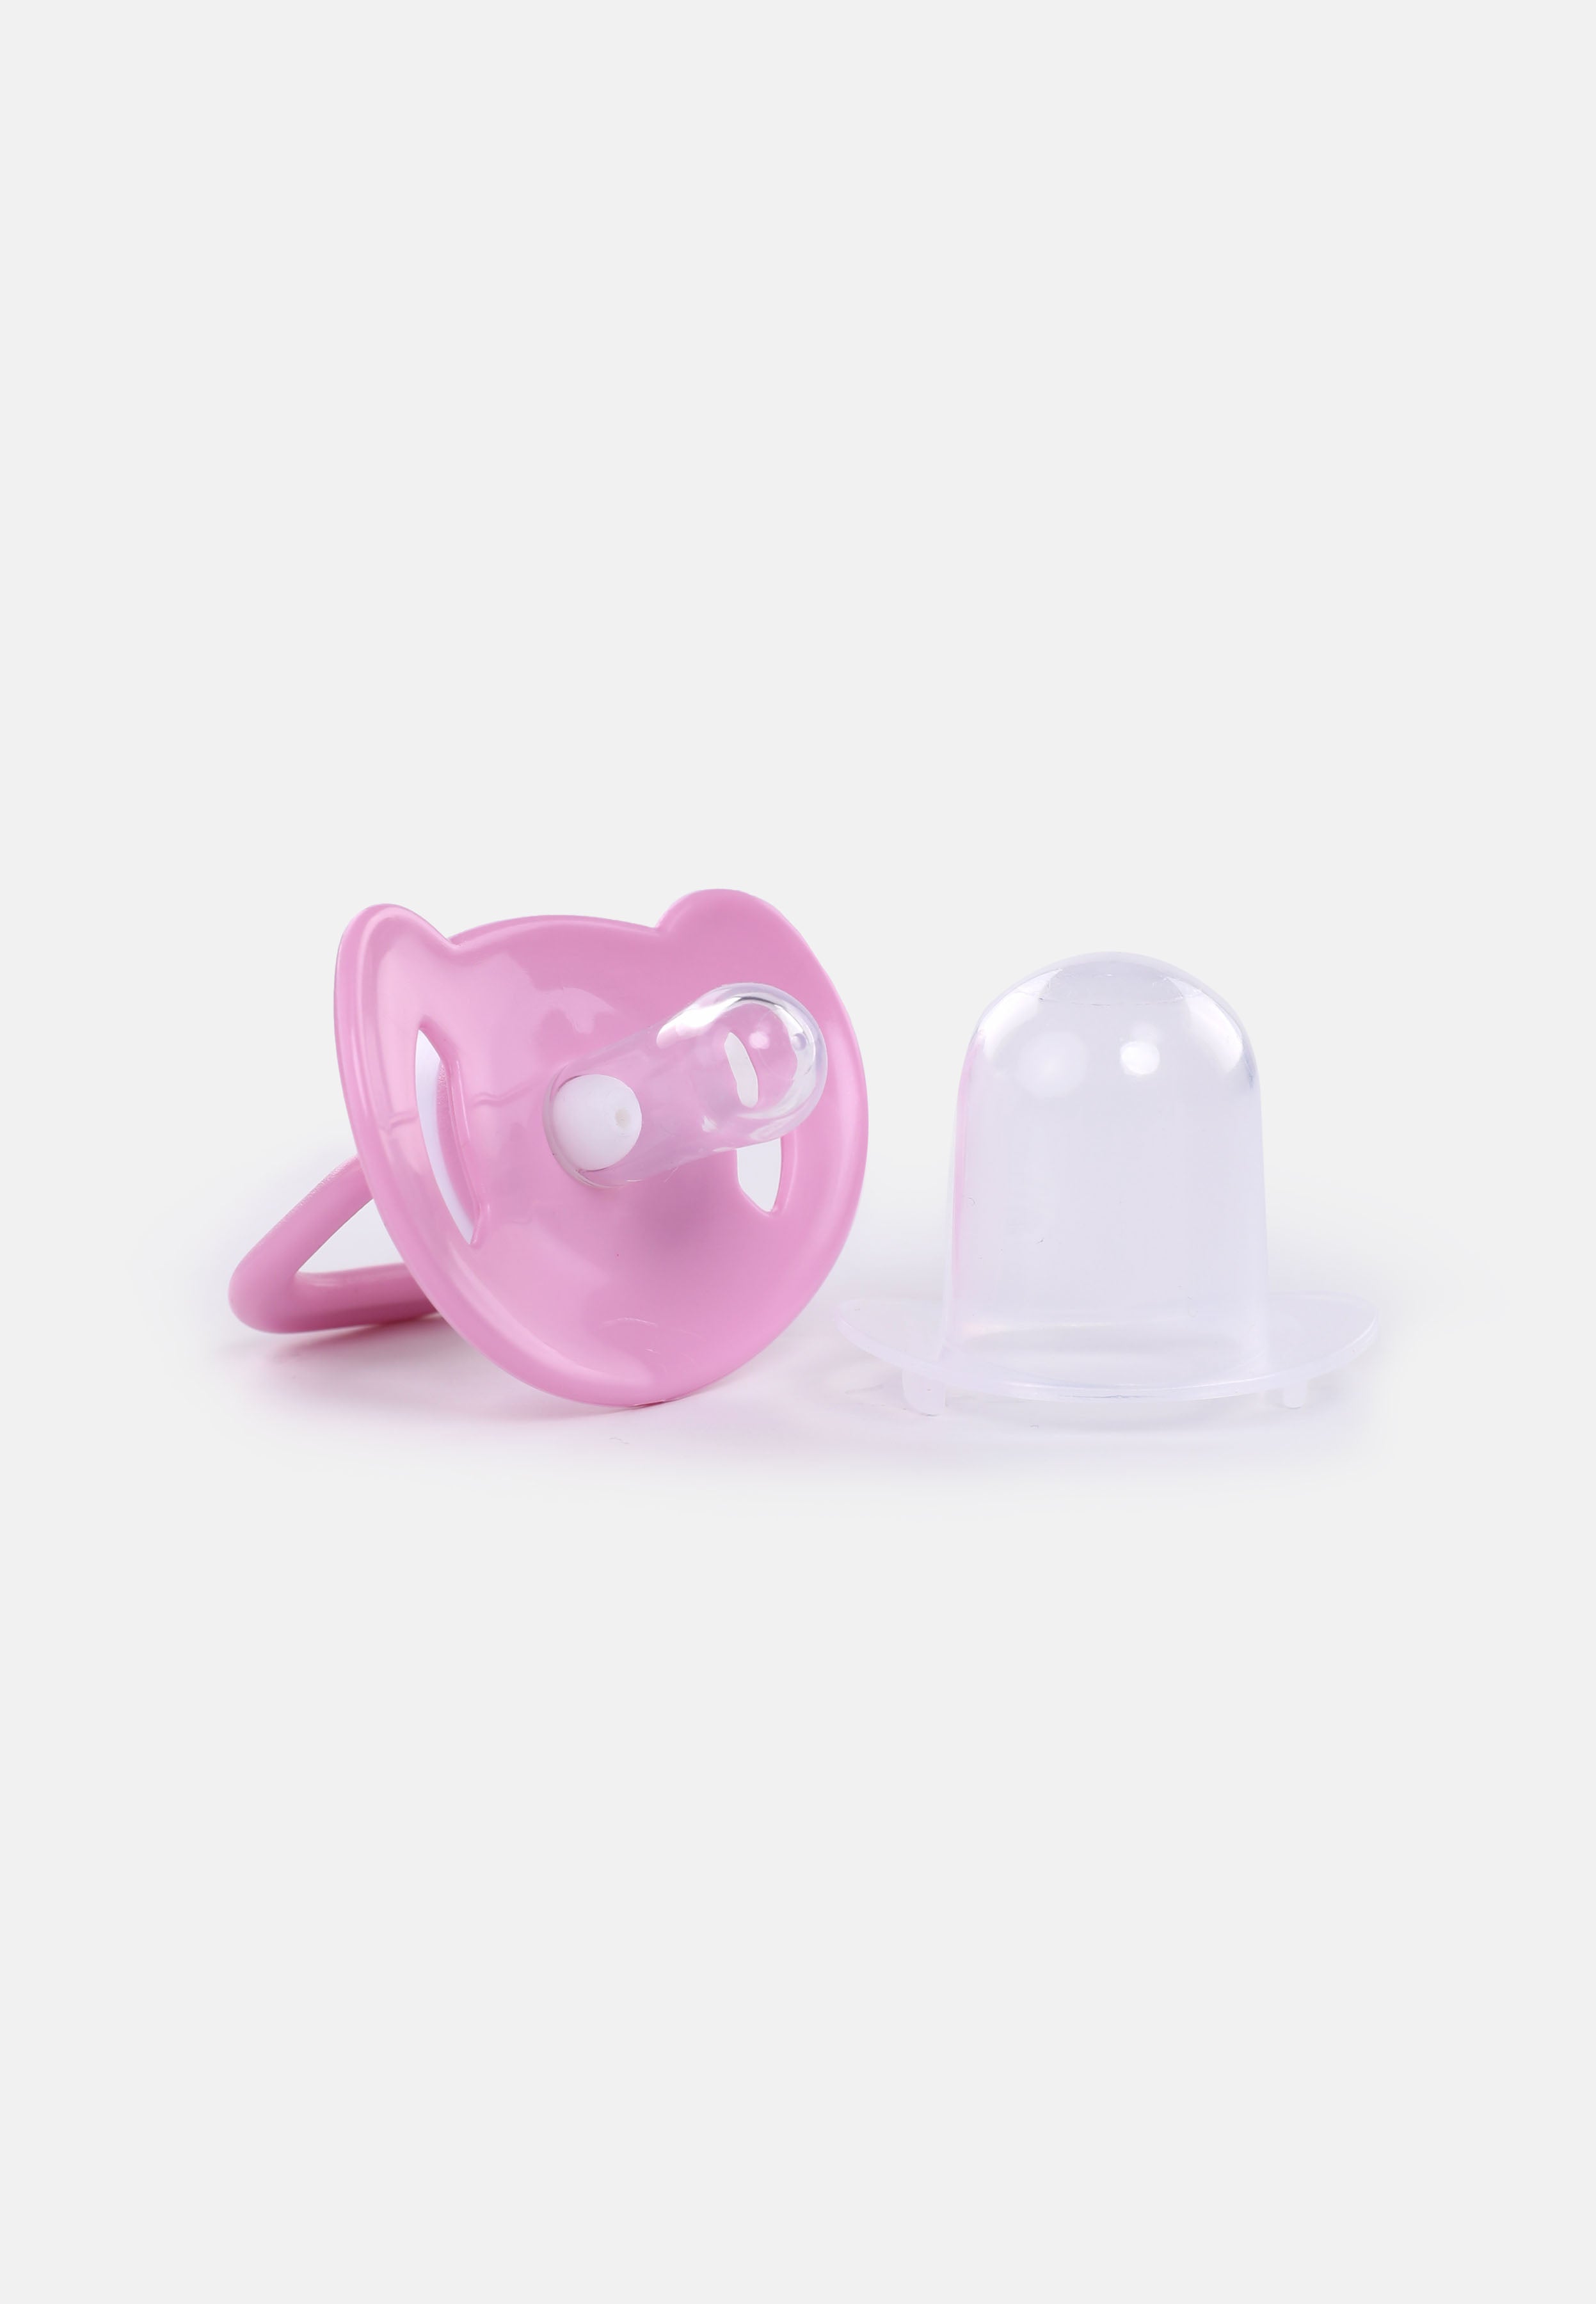 Baby Cheetah Soother with Case (2 IN 1) - Oval Teats (0-6M) - CBB-ST21076